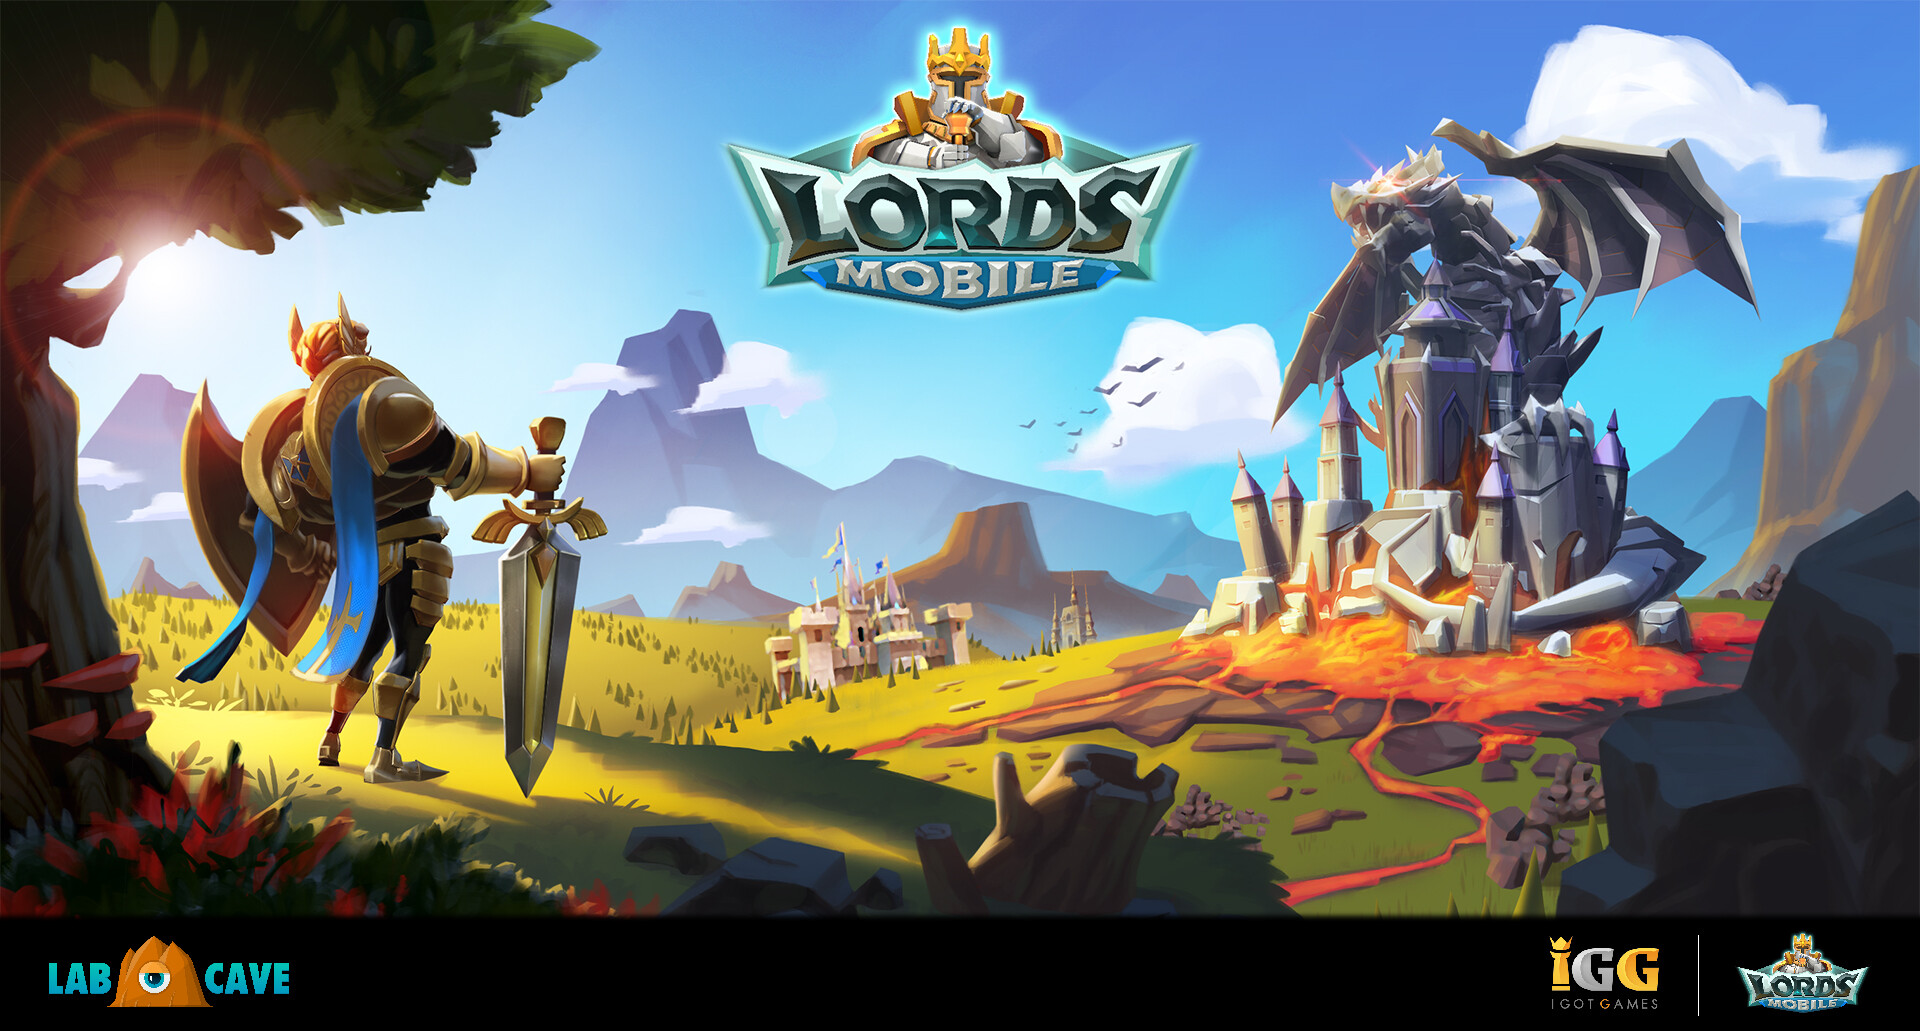 IDCGames - Lords Mobile - PC Games